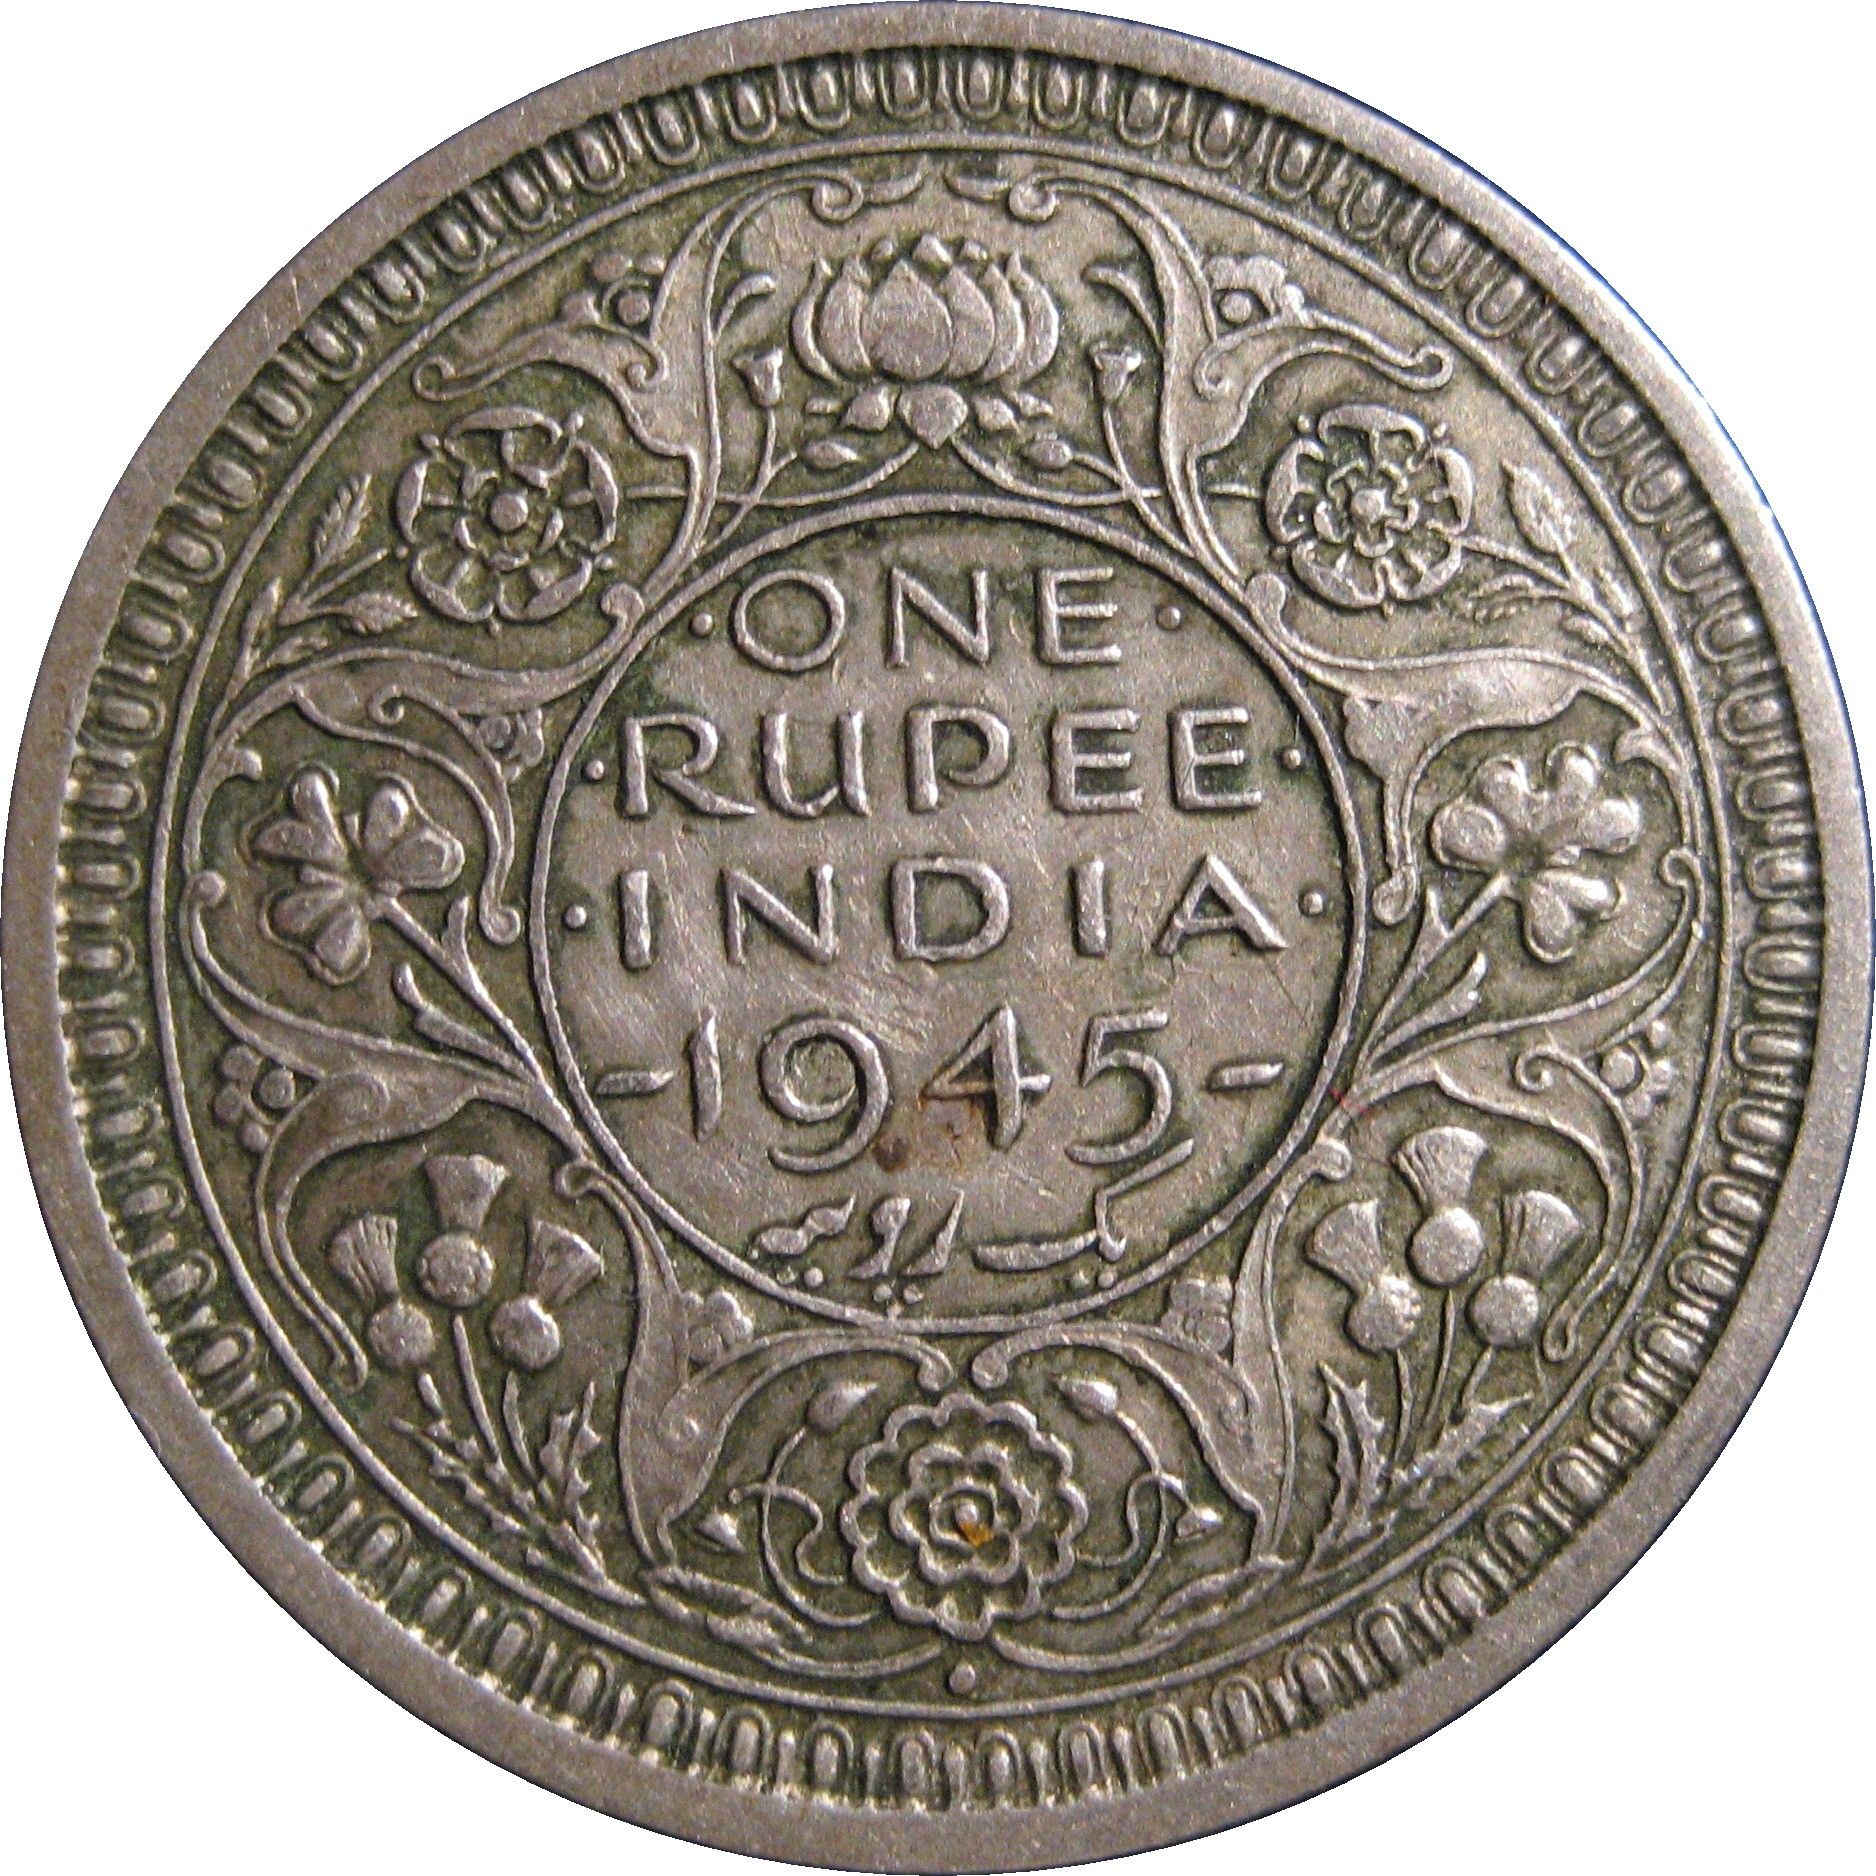 Indian One Rupee Coin, 1945 | India, My India: My Incredible India ...